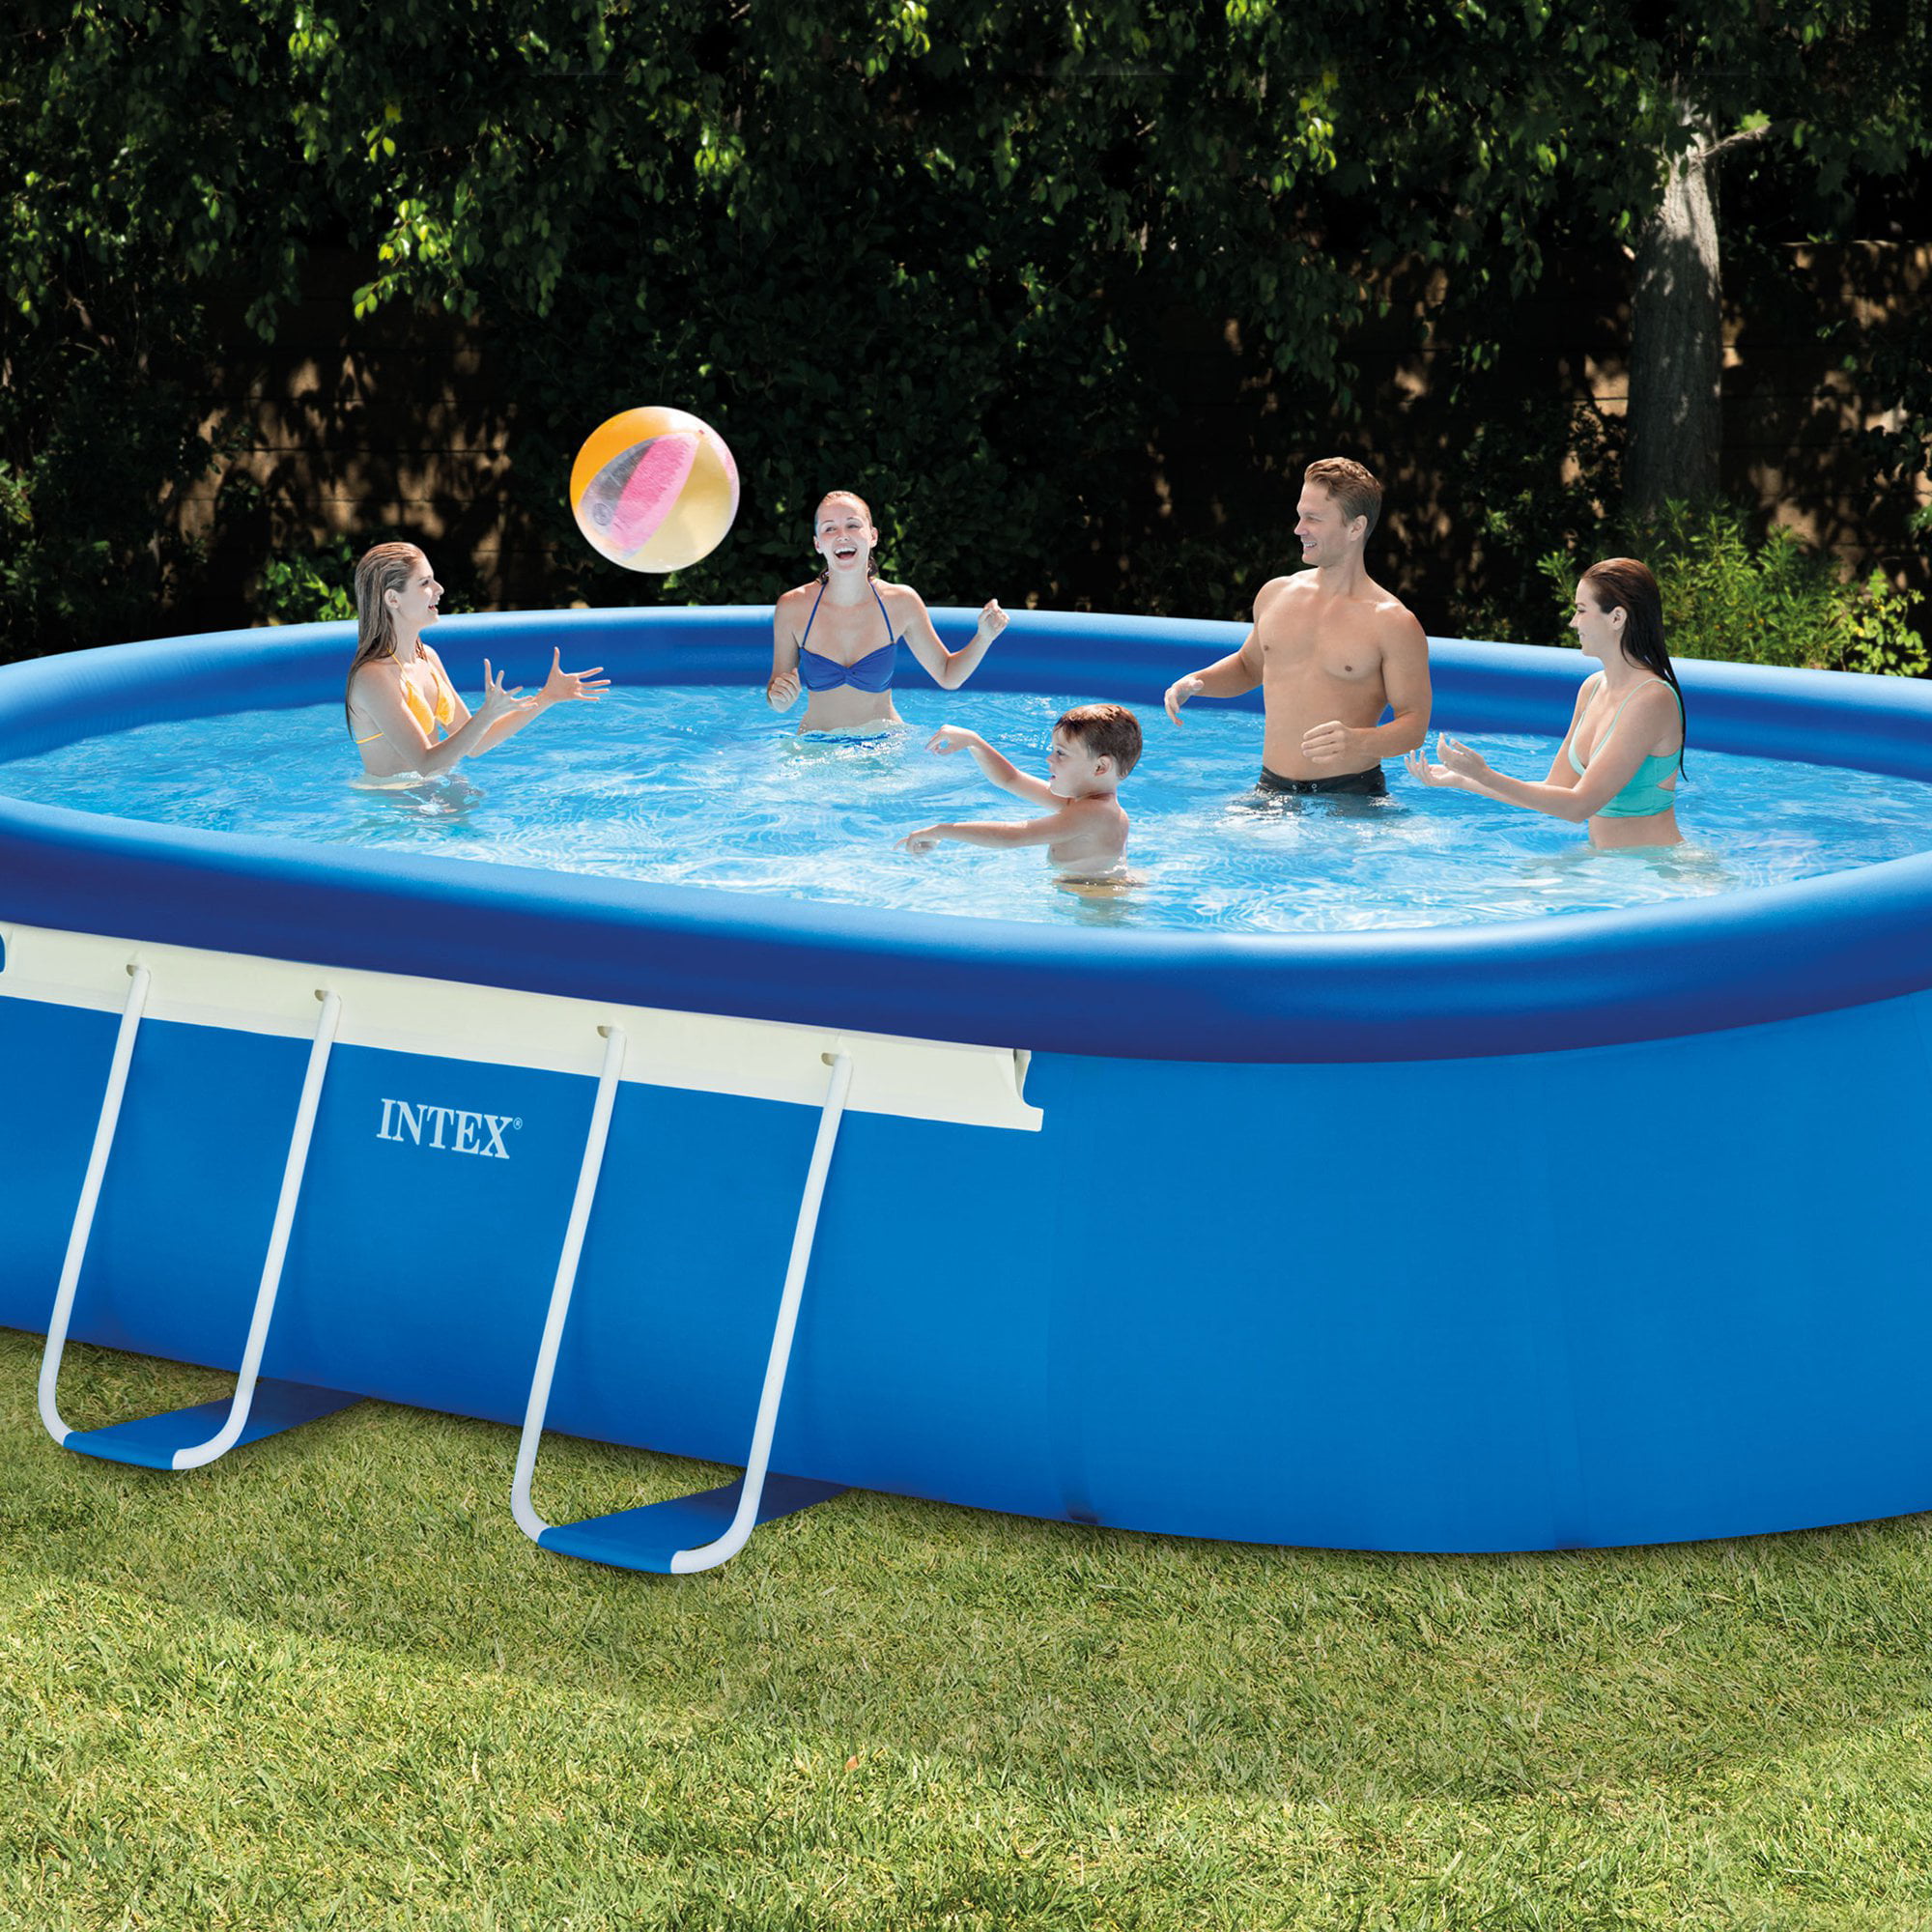 Intex 18' x 10' x 42" Oval Frame Above Ground Swimming Pool with Filter Pump